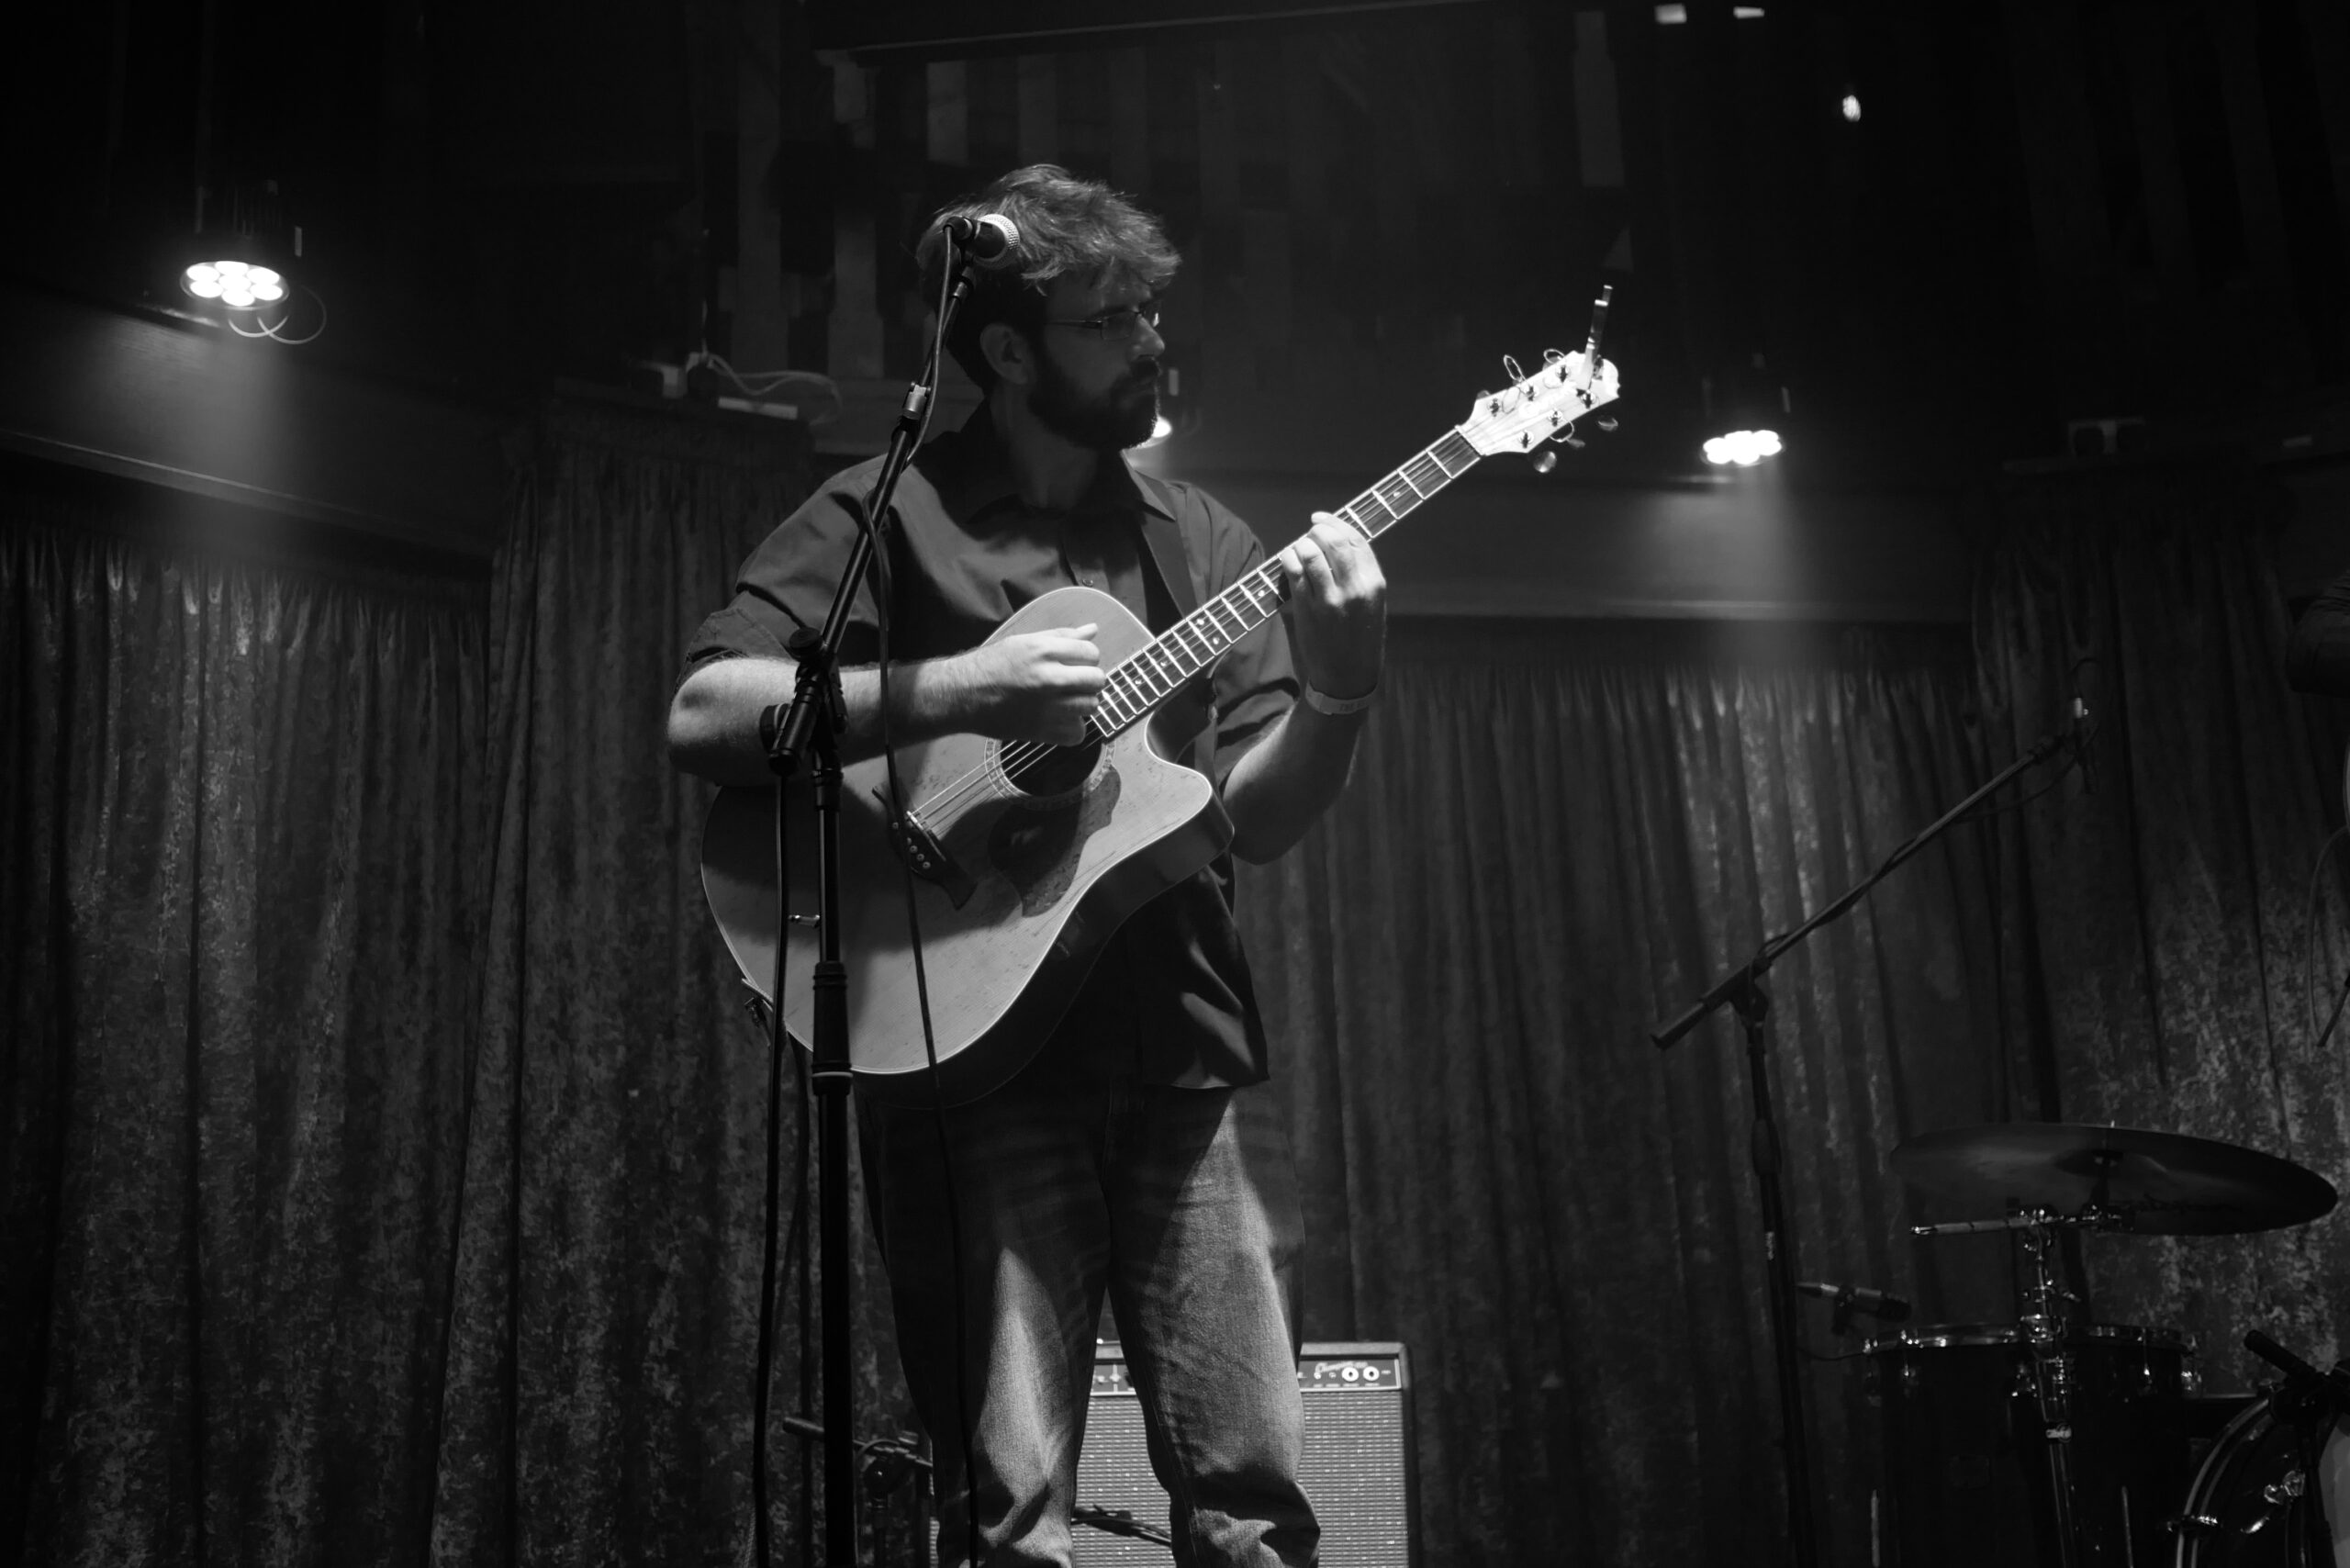 Photograph of a bearded man holding an acoustic guitar, staring at his guitar on stage.